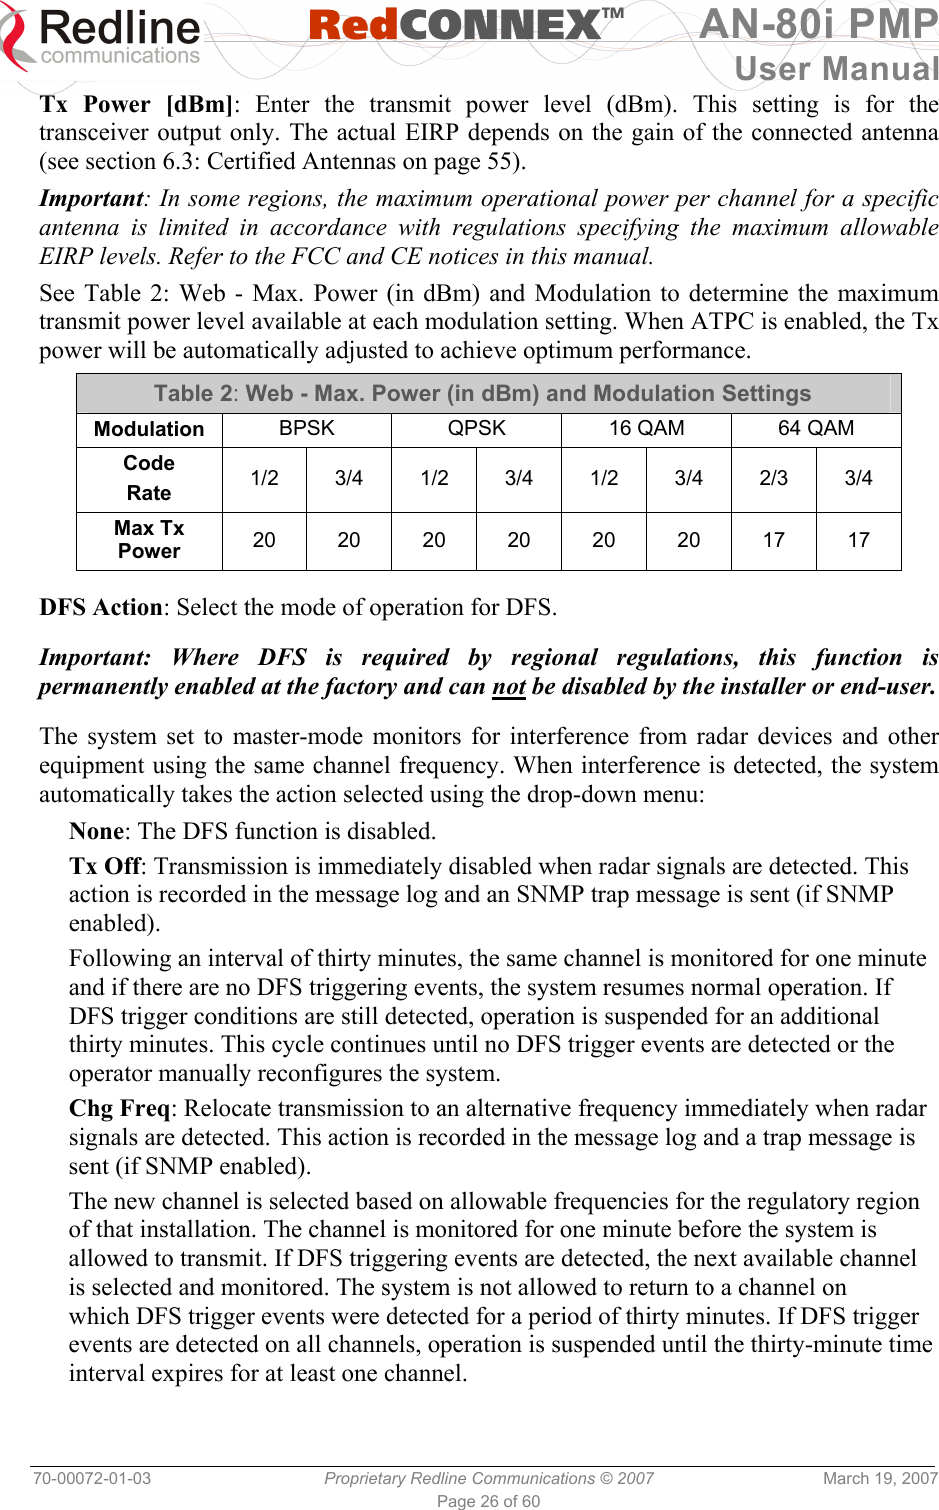   RedCONNEXTM AN-80i PMP User Manual 70-00072-01-03  Proprietary Redline Communications © 2007  March 19, 2007 Page 26 of 60 Tx Power [dBm]: Enter the transmit power level (dBm). This setting is for the transceiver output only. The actual EIRP depends on the gain of the connected antenna (see section 6.3: Certified Antennas on page 55). Important: In some regions, the maximum operational power per channel for a specific antenna is limited in accordance with regulations specifying the maximum allowable EIRP levels. Refer to the FCC and CE notices in this manual. See Table 2: Web - Max. Power (in dBm) and Modulation to determine the maximum transmit power level available at each modulation setting. When ATPC is enabled, the Tx power will be automatically adjusted to achieve optimum performance. Table 2: Web - Max. Power (in dBm) and Modulation Settings Modulation  BPSK  QPSK  16 QAM  64 QAM Code Rate  1/2 3/4 1/2 3/4 1/2 3/4 2/3 3/4 Max Tx Power  20 20 20 20 20 20 17 17   DFS Action: Select the mode of operation for DFS.  Important: Where DFS is required by regional regulations, this function is permanently enabled at the factory and can not be disabled by the installer or end-user.  The system set to master-mode monitors for interference from radar devices and other equipment using the same channel frequency. When interference is detected, the system automatically takes the action selected using the drop-down menu: None: The DFS function is disabled. Tx Off: Transmission is immediately disabled when radar signals are detected. This action is recorded in the message log and an SNMP trap message is sent (if SNMP enabled). Following an interval of thirty minutes, the same channel is monitored for one minute and if there are no DFS triggering events, the system resumes normal operation. If DFS trigger conditions are still detected, operation is suspended for an additional thirty minutes. This cycle continues until no DFS trigger events are detected or the operator manually reconfigures the system. Chg Freq: Relocate transmission to an alternative frequency immediately when radar signals are detected. This action is recorded in the message log and a trap message is sent (if SNMP enabled). The new channel is selected based on allowable frequencies for the regulatory region of that installation. The channel is monitored for one minute before the system is allowed to transmit. If DFS triggering events are detected, the next available channel is selected and monitored. The system is not allowed to return to a channel on which DFS trigger events were detected for a period of thirty minutes. If DFS trigger events are detected on all channels, operation is suspended until the thirty-minute time interval expires for at least one channel. 